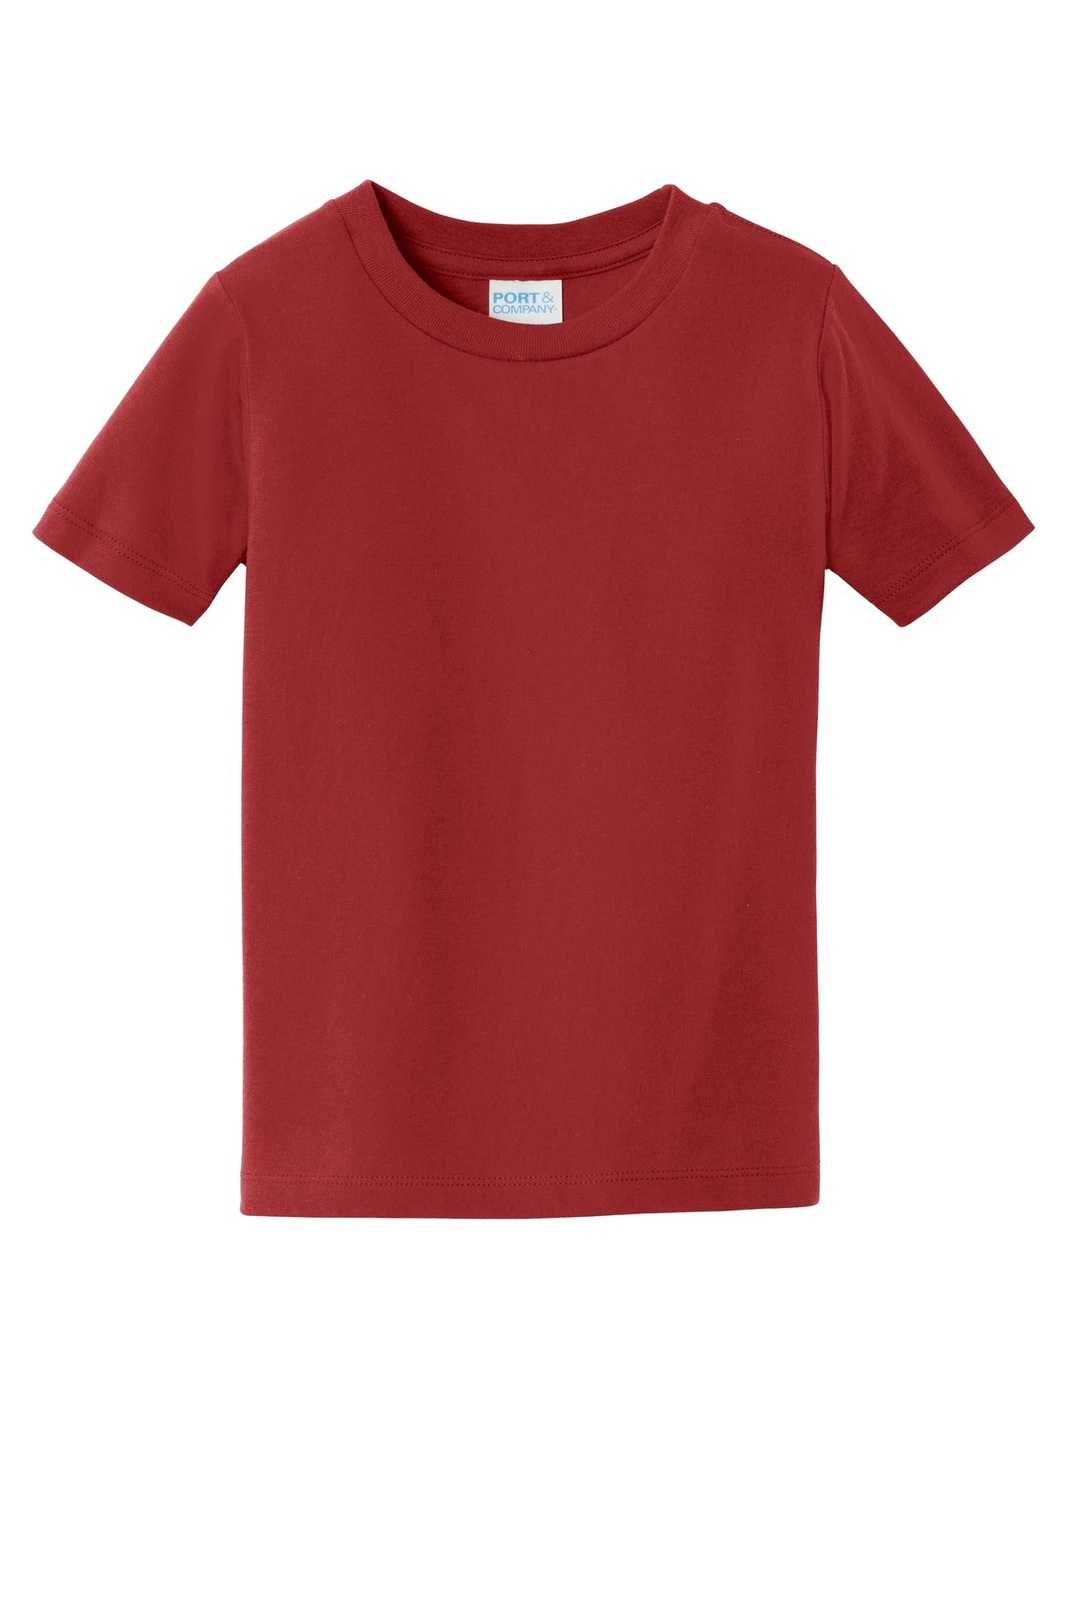 Port & Company PC450TD Toddler Fan Favorite Tee - Team Cardinal - HIT a Double - 1